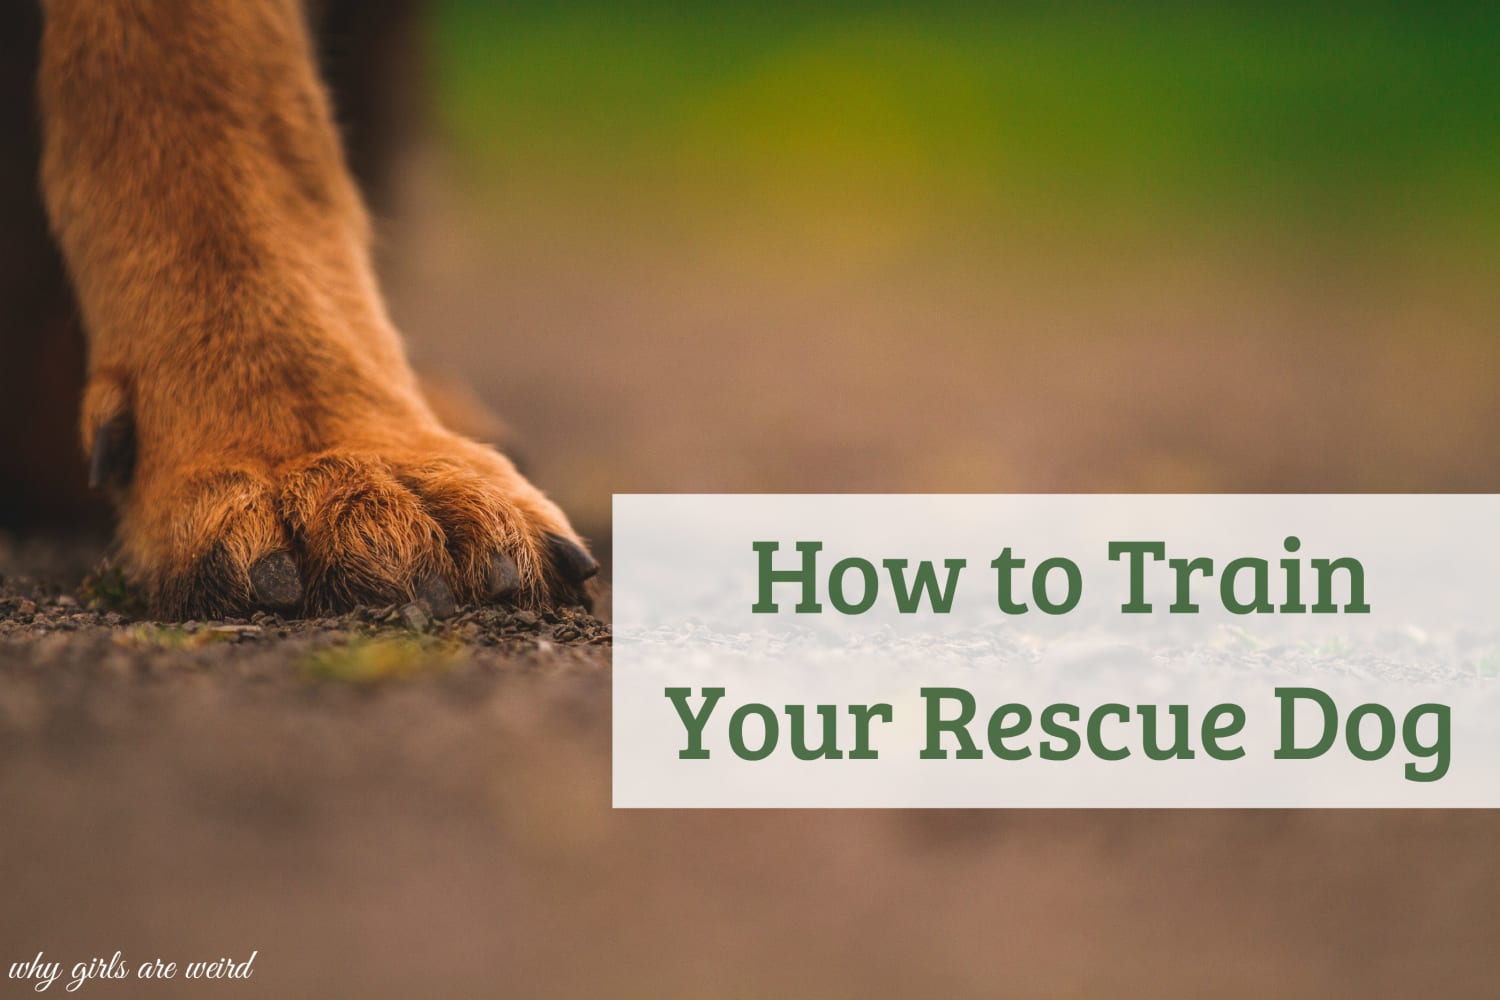 How to Train Your Rescue Dog